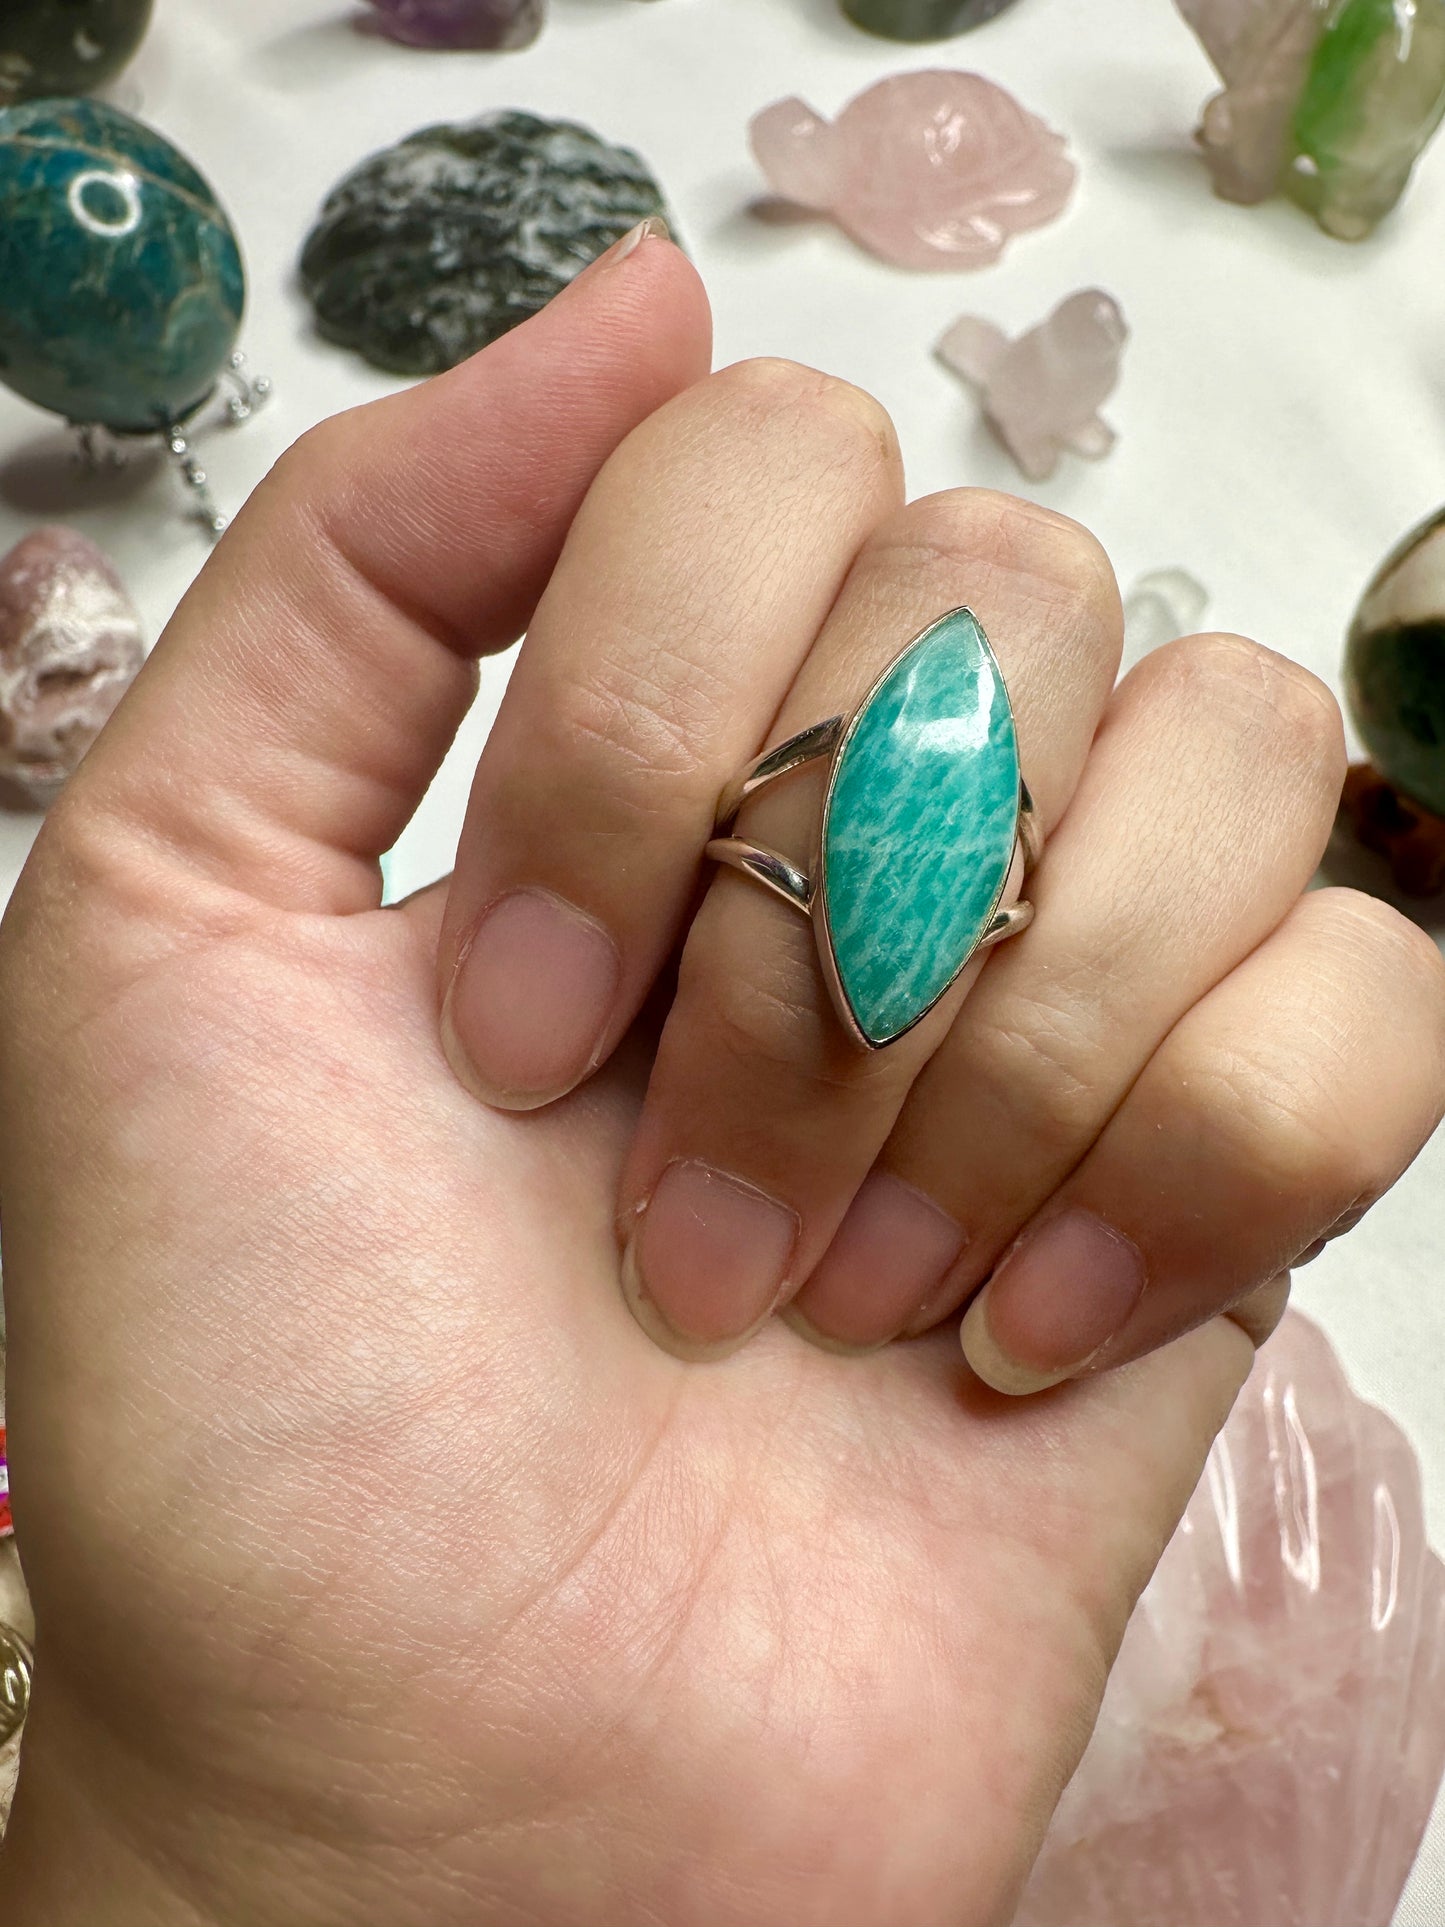 Stunning Amazonite Ring in Sterling Silver, Size 8.5 - Elegant Handcrafted Gemstone Jewelry, Perfect Gift for Special Occasions